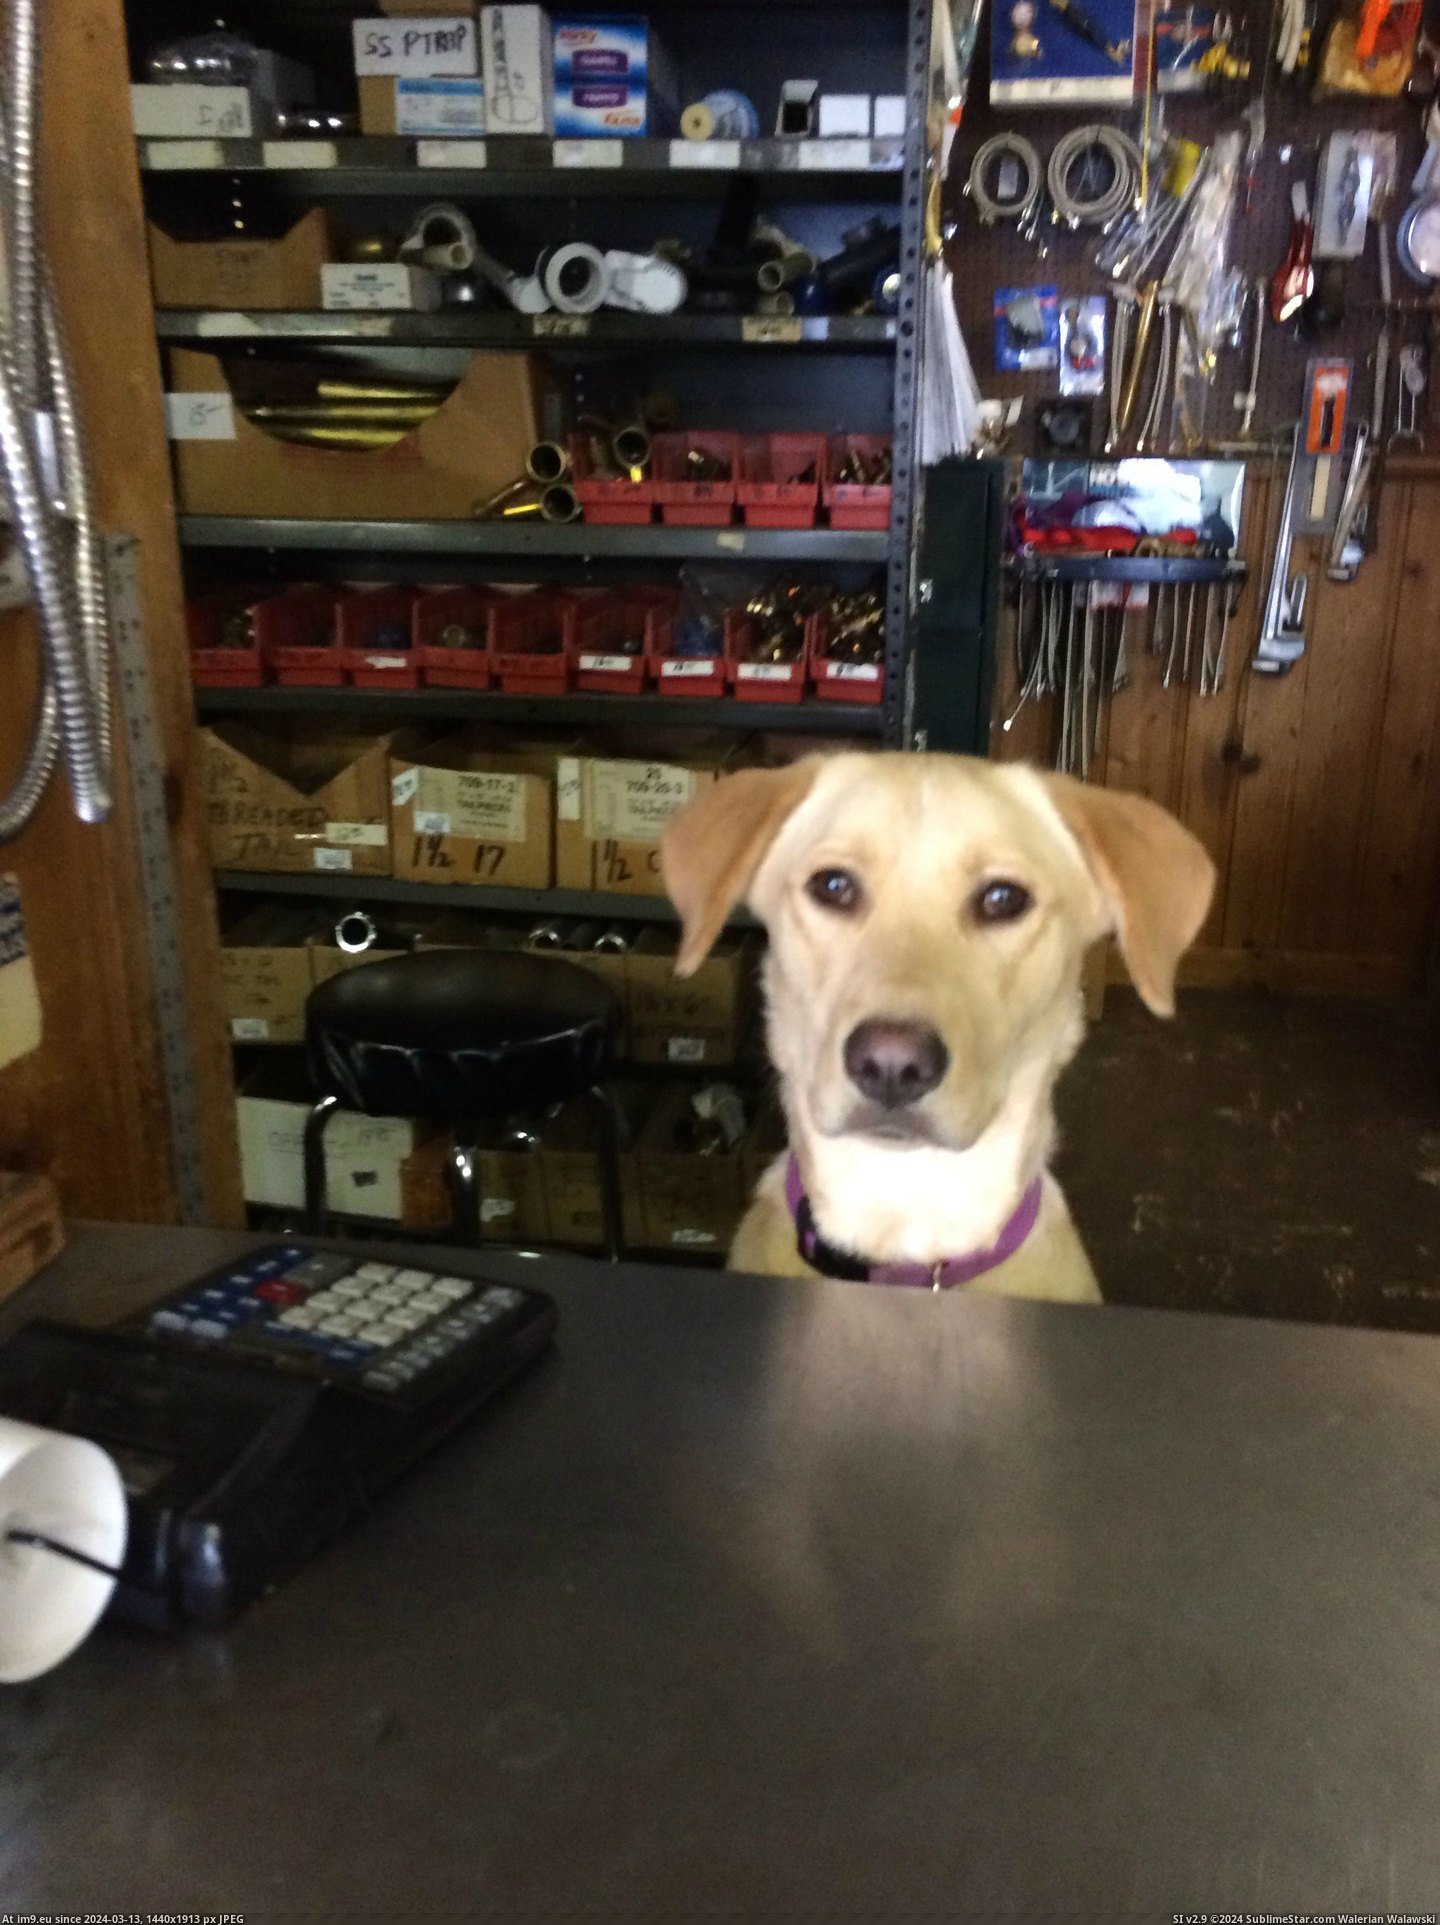 #High #She #Bit #Local #Plumbing #Bearable #Greeter #Store #Official #Supply #Prices [Aww] This is the official greeter at the local plumbing supply store. She makes the high prices a bit more bearable, at least. Pic. (Obraz z album My r/AWW favs))